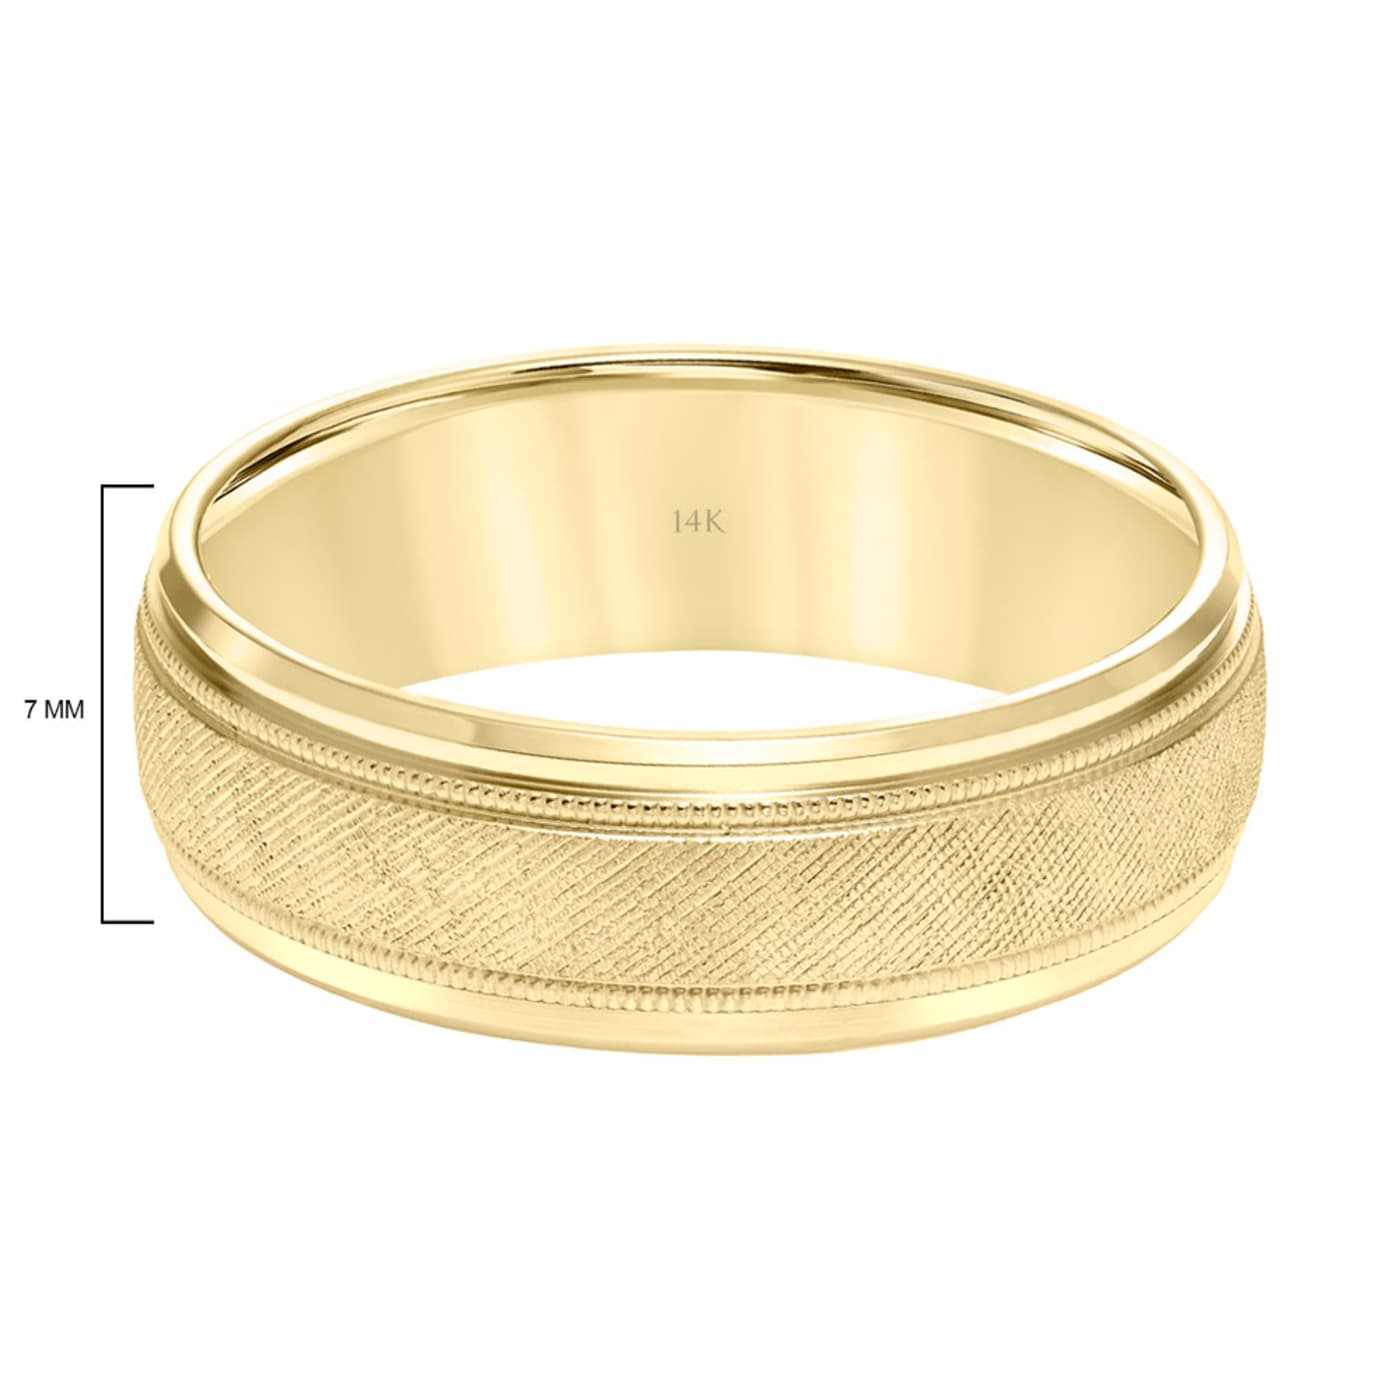 Milgrain Gold Accents 14K Brilliant with 1STGPA Expressions Finish 7MM Band by Yellow Wedding - Florentine